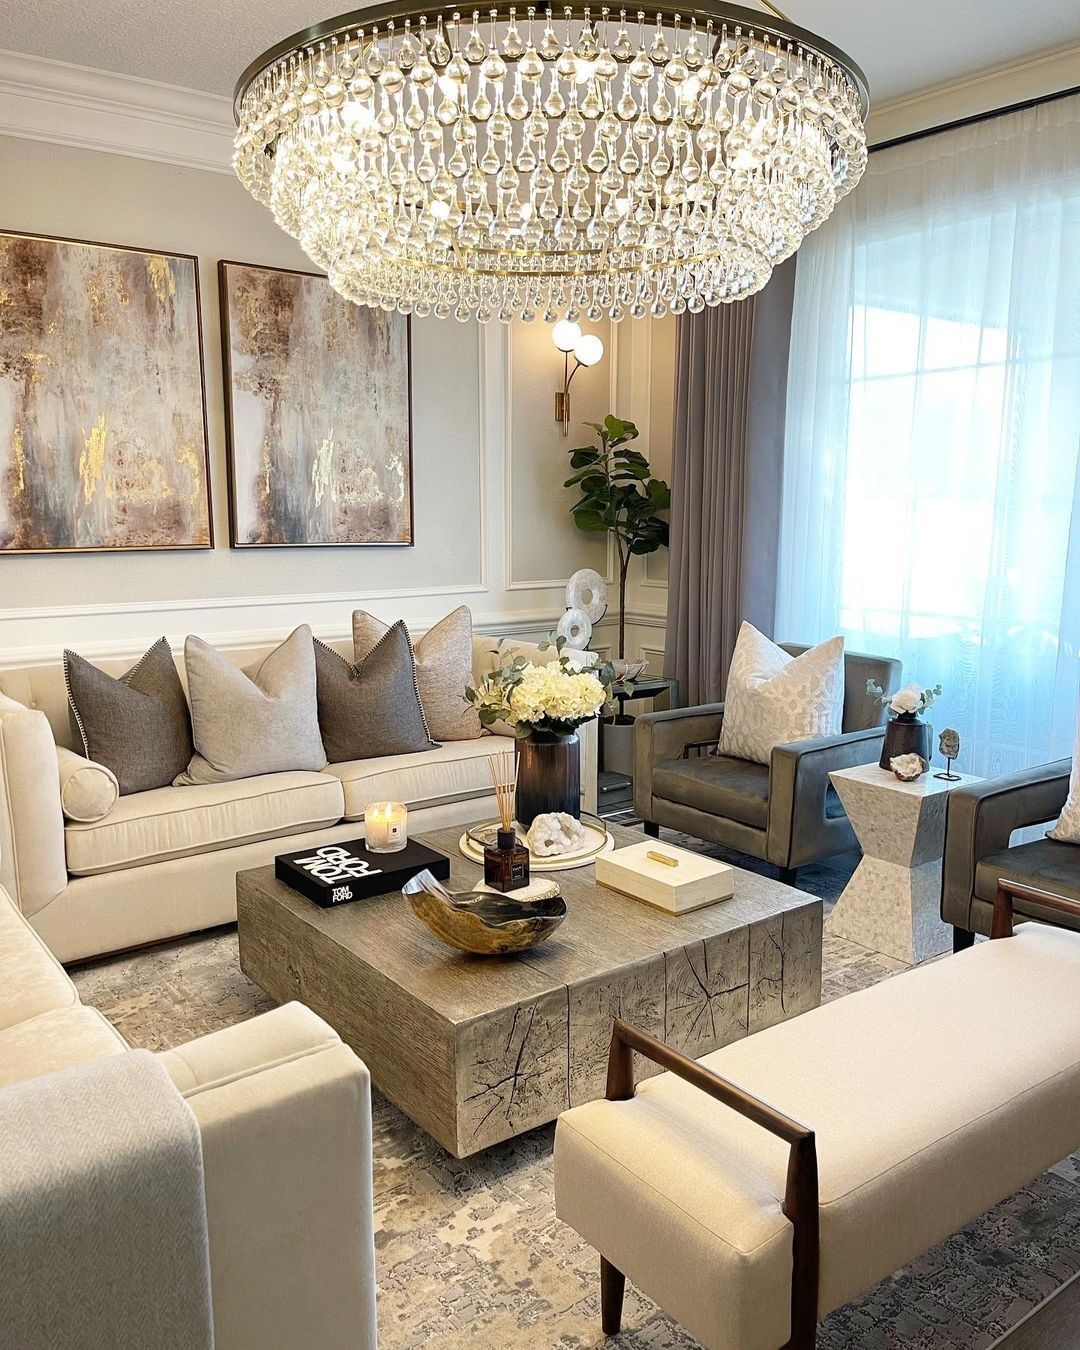 Elevate the Room with a Luxurious Crystal Chandelier